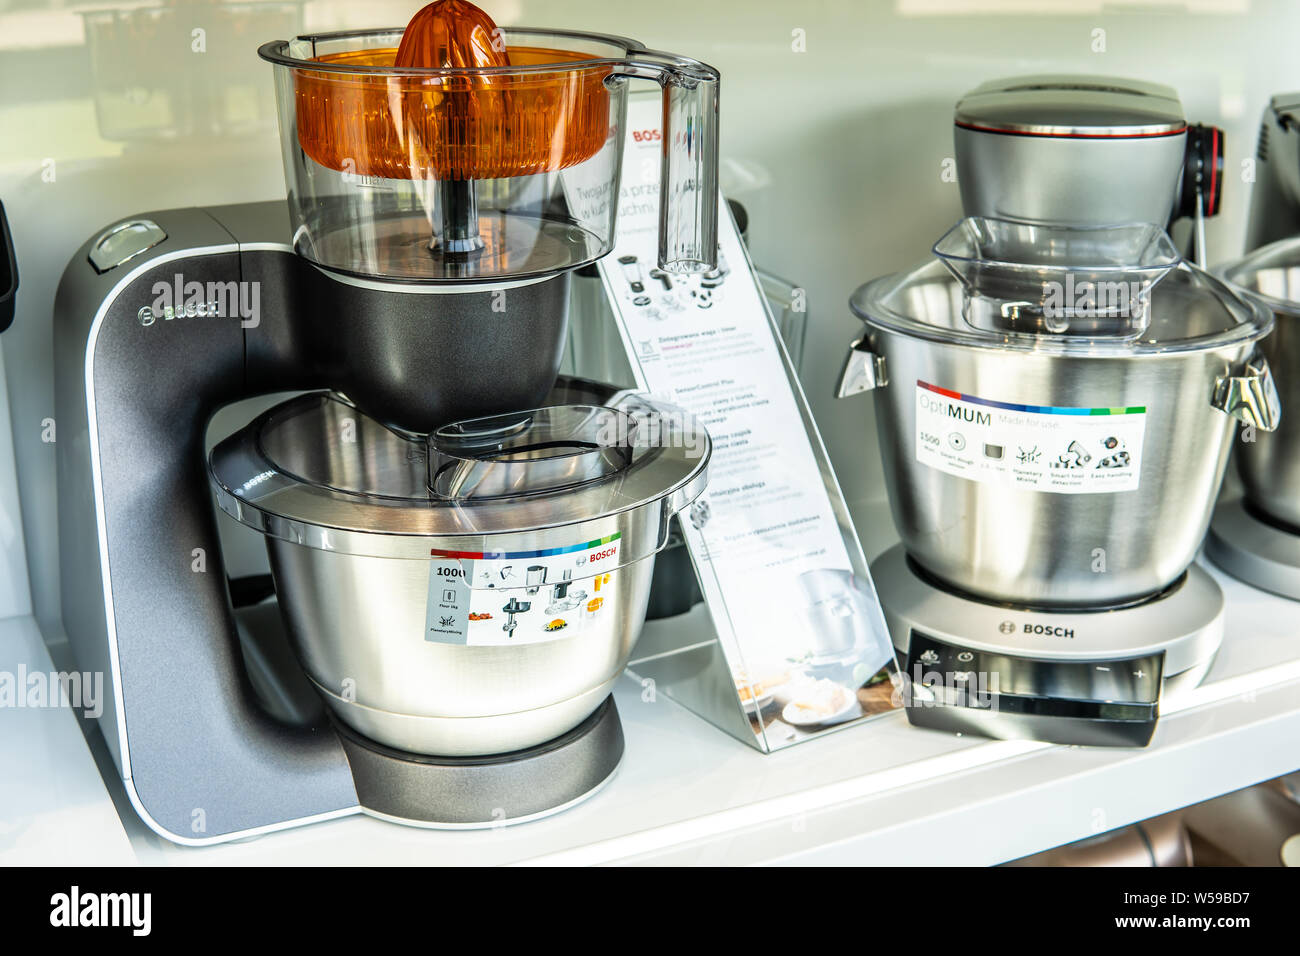 https://c8.alamy.com/comp/W59BD7/inside-bosch-showroom-bosch-food-processor-kitchen-machines-blenders-meat-grinders-toaster-kettle-for-perfect-cooking-experience-W59BD7.jpg